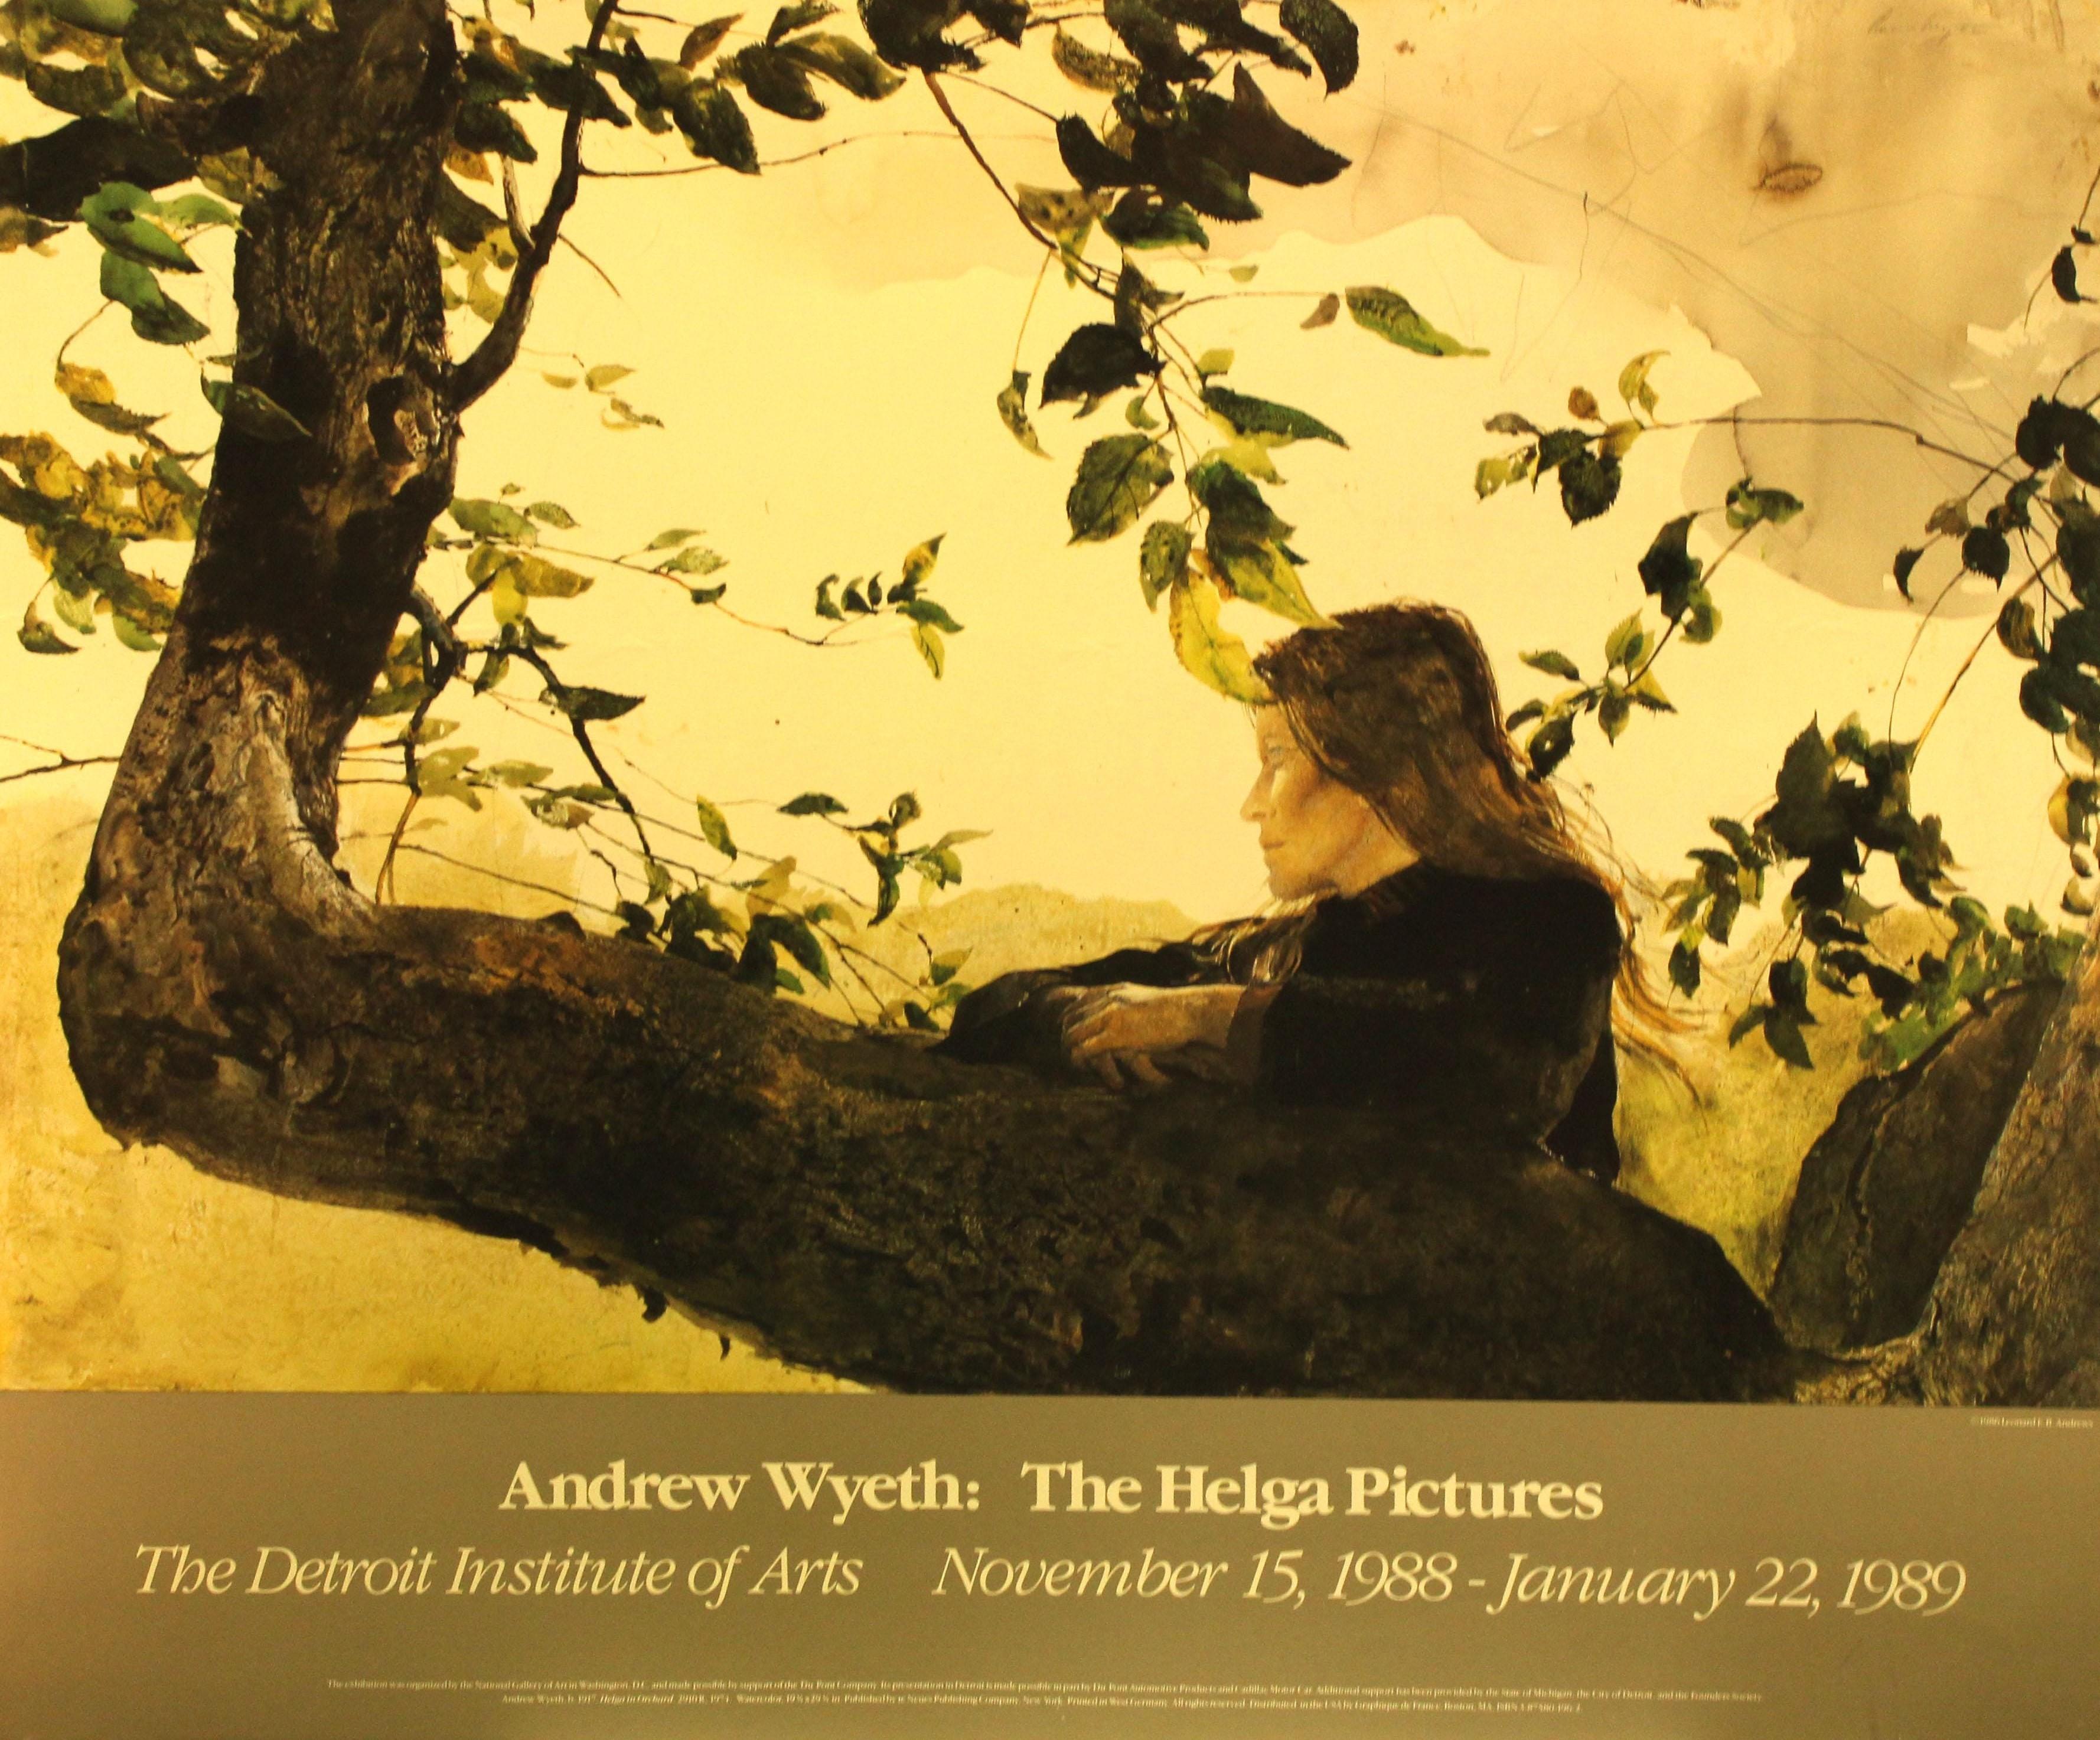 Andrew Wyeth Portrait Print - The Helga Pictures-Detroit Institute of Arts, November 15, 1988-January 22